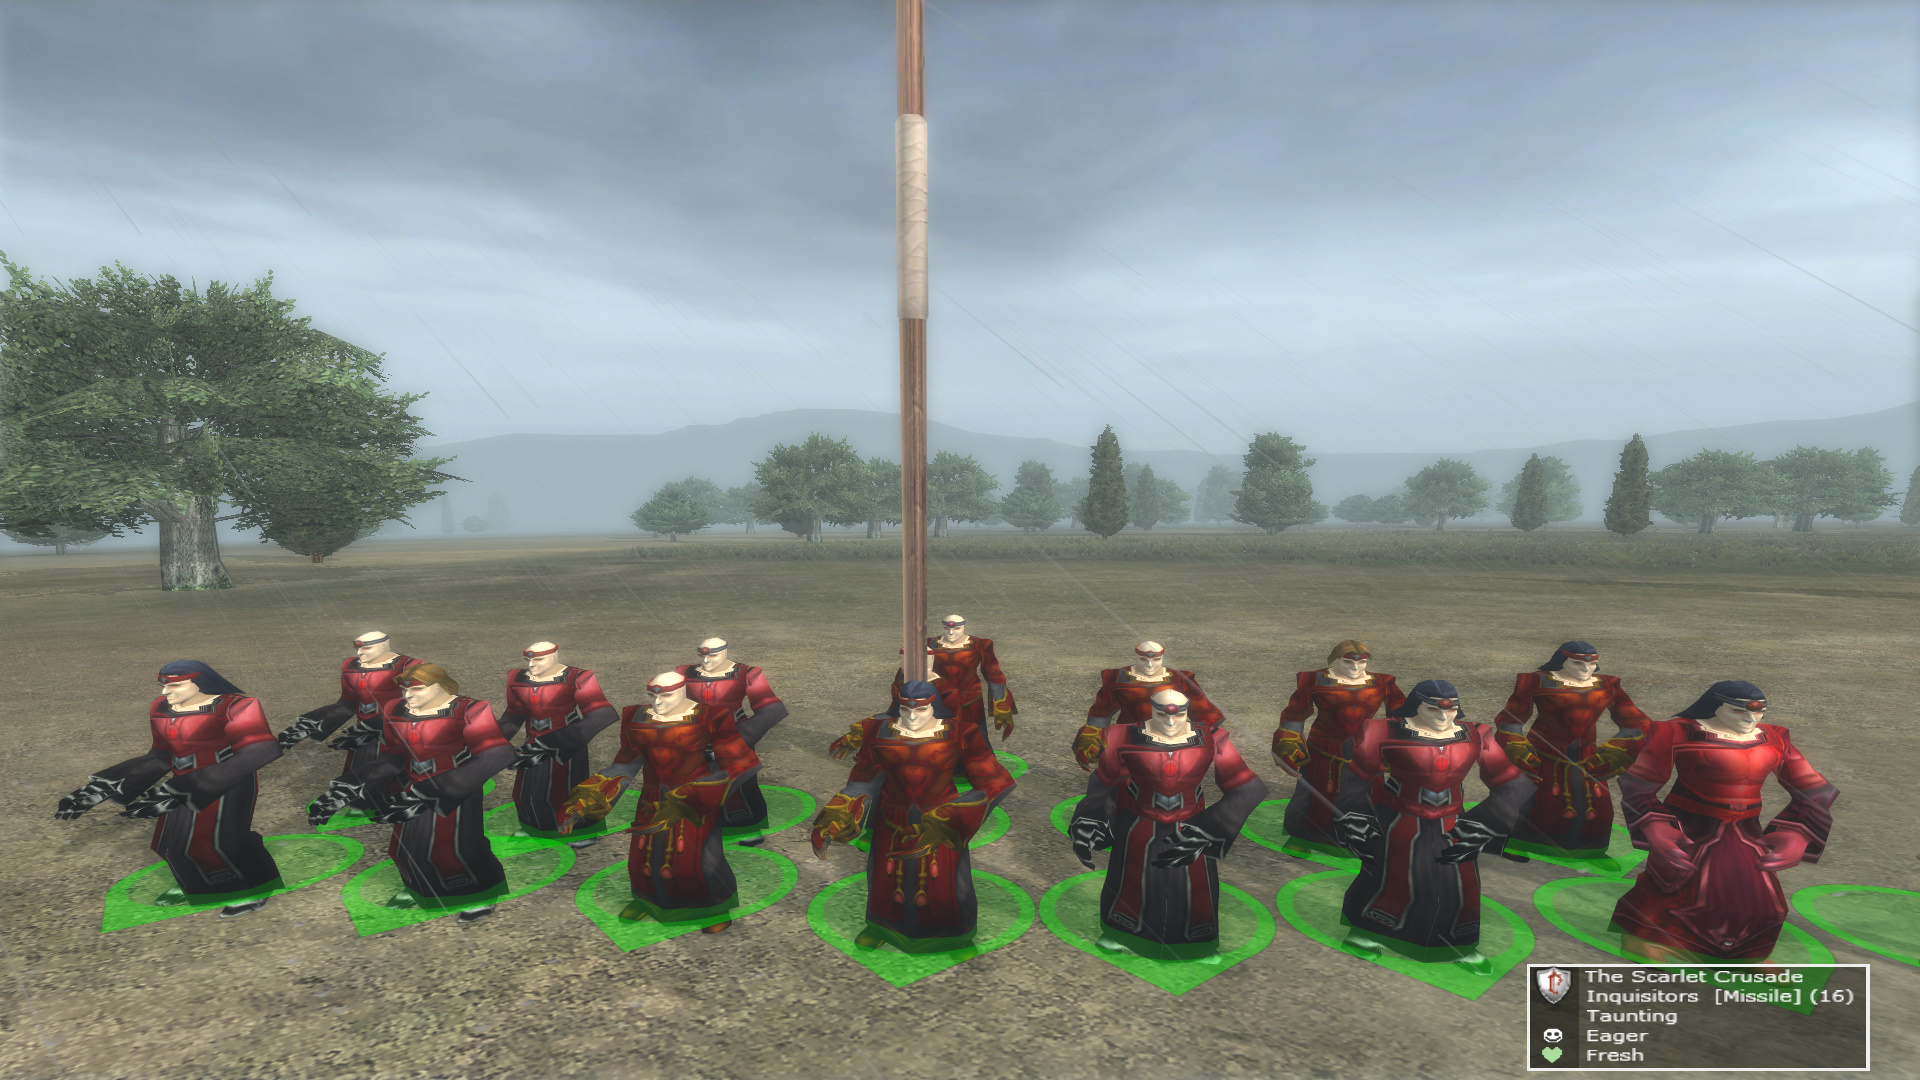 The Scarlet Crusade has finally gotten their equivalent of the Human mages ...